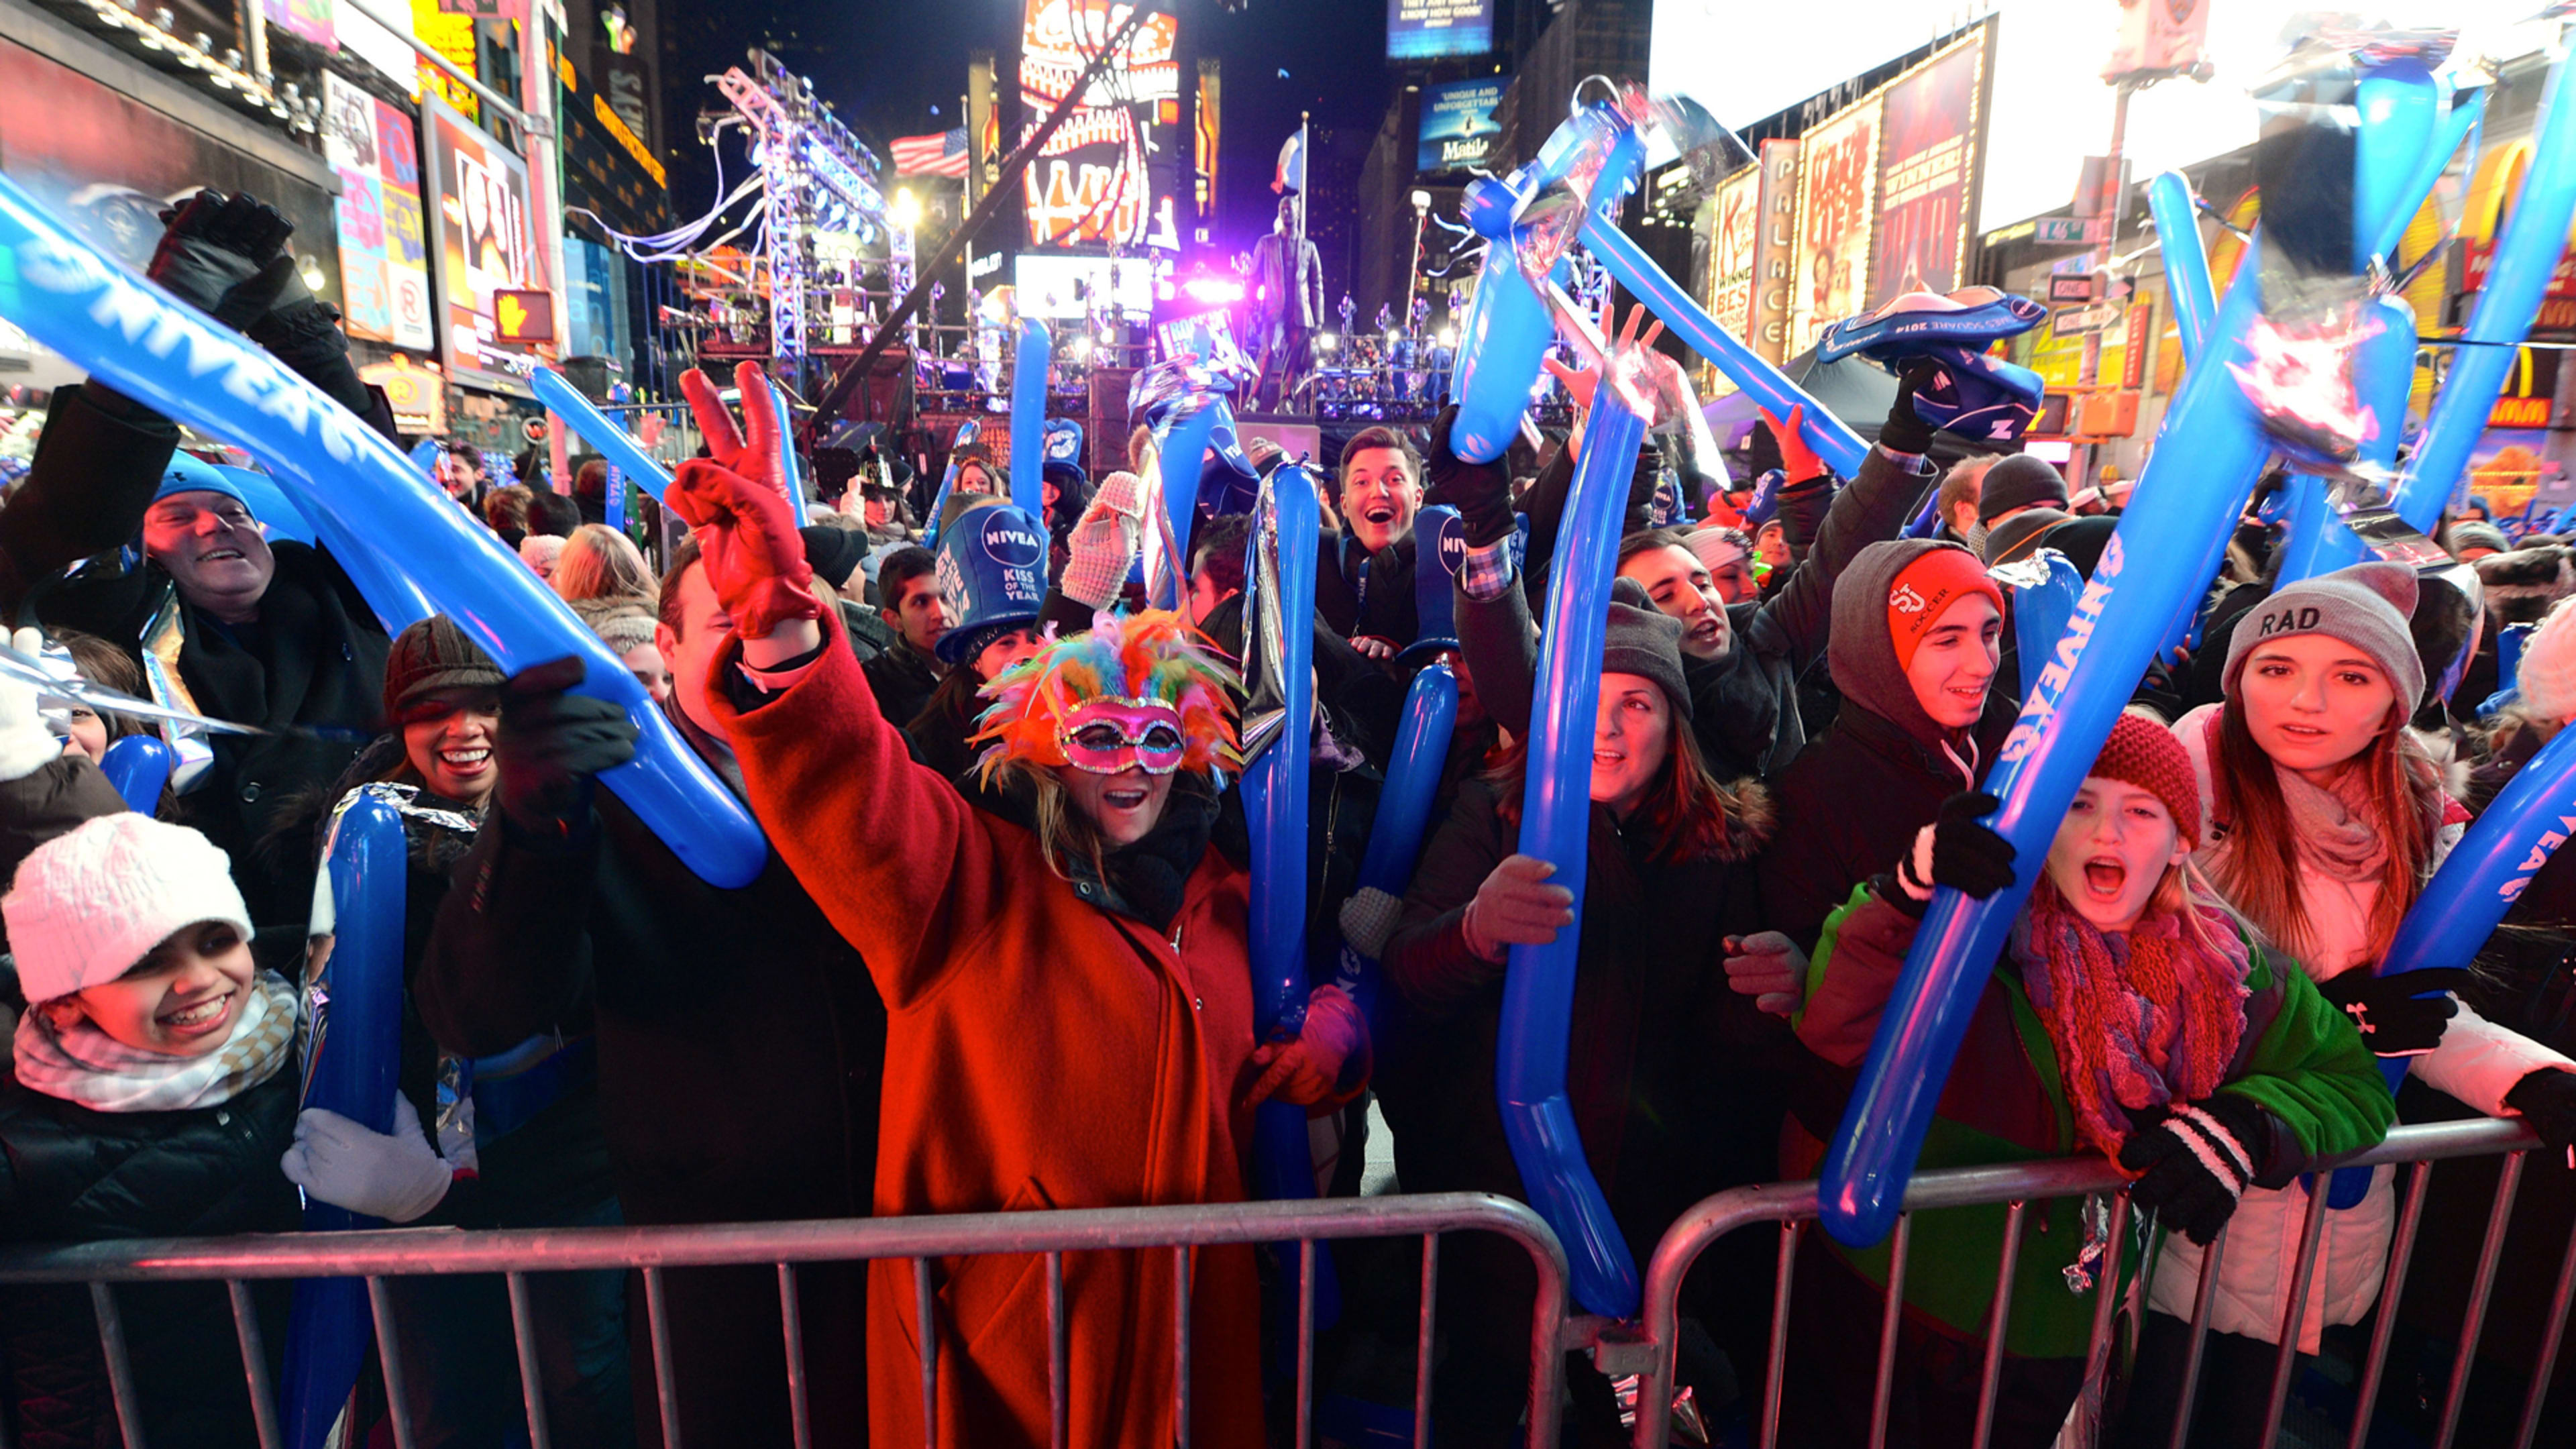 New Year’s Eve live stream: How to watch the ball drop and Times Square performances online